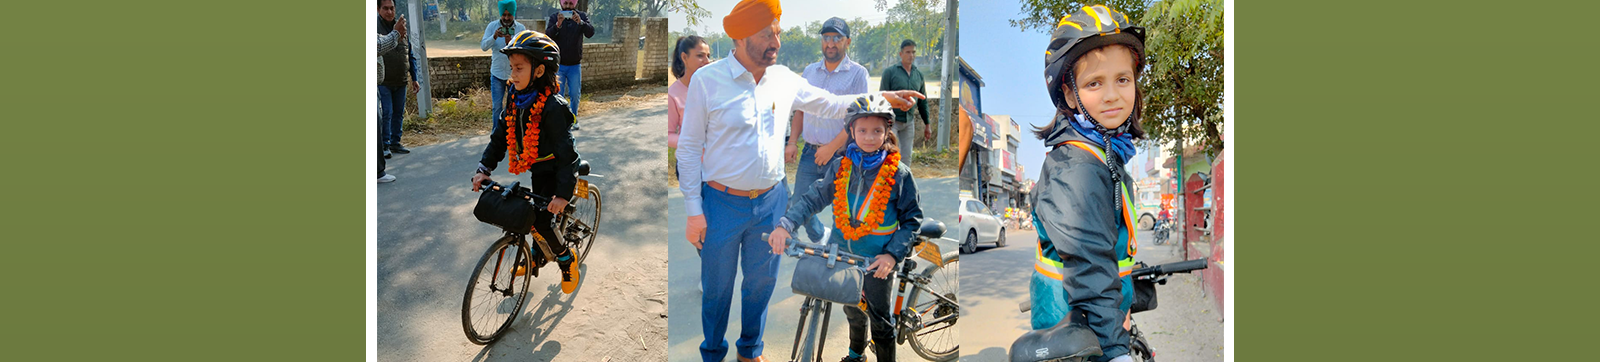 Pit Stop Chandigarh: For 8-yr-old Raavi Kashmir to Kanyakumari is a Cycle’s Distance Away